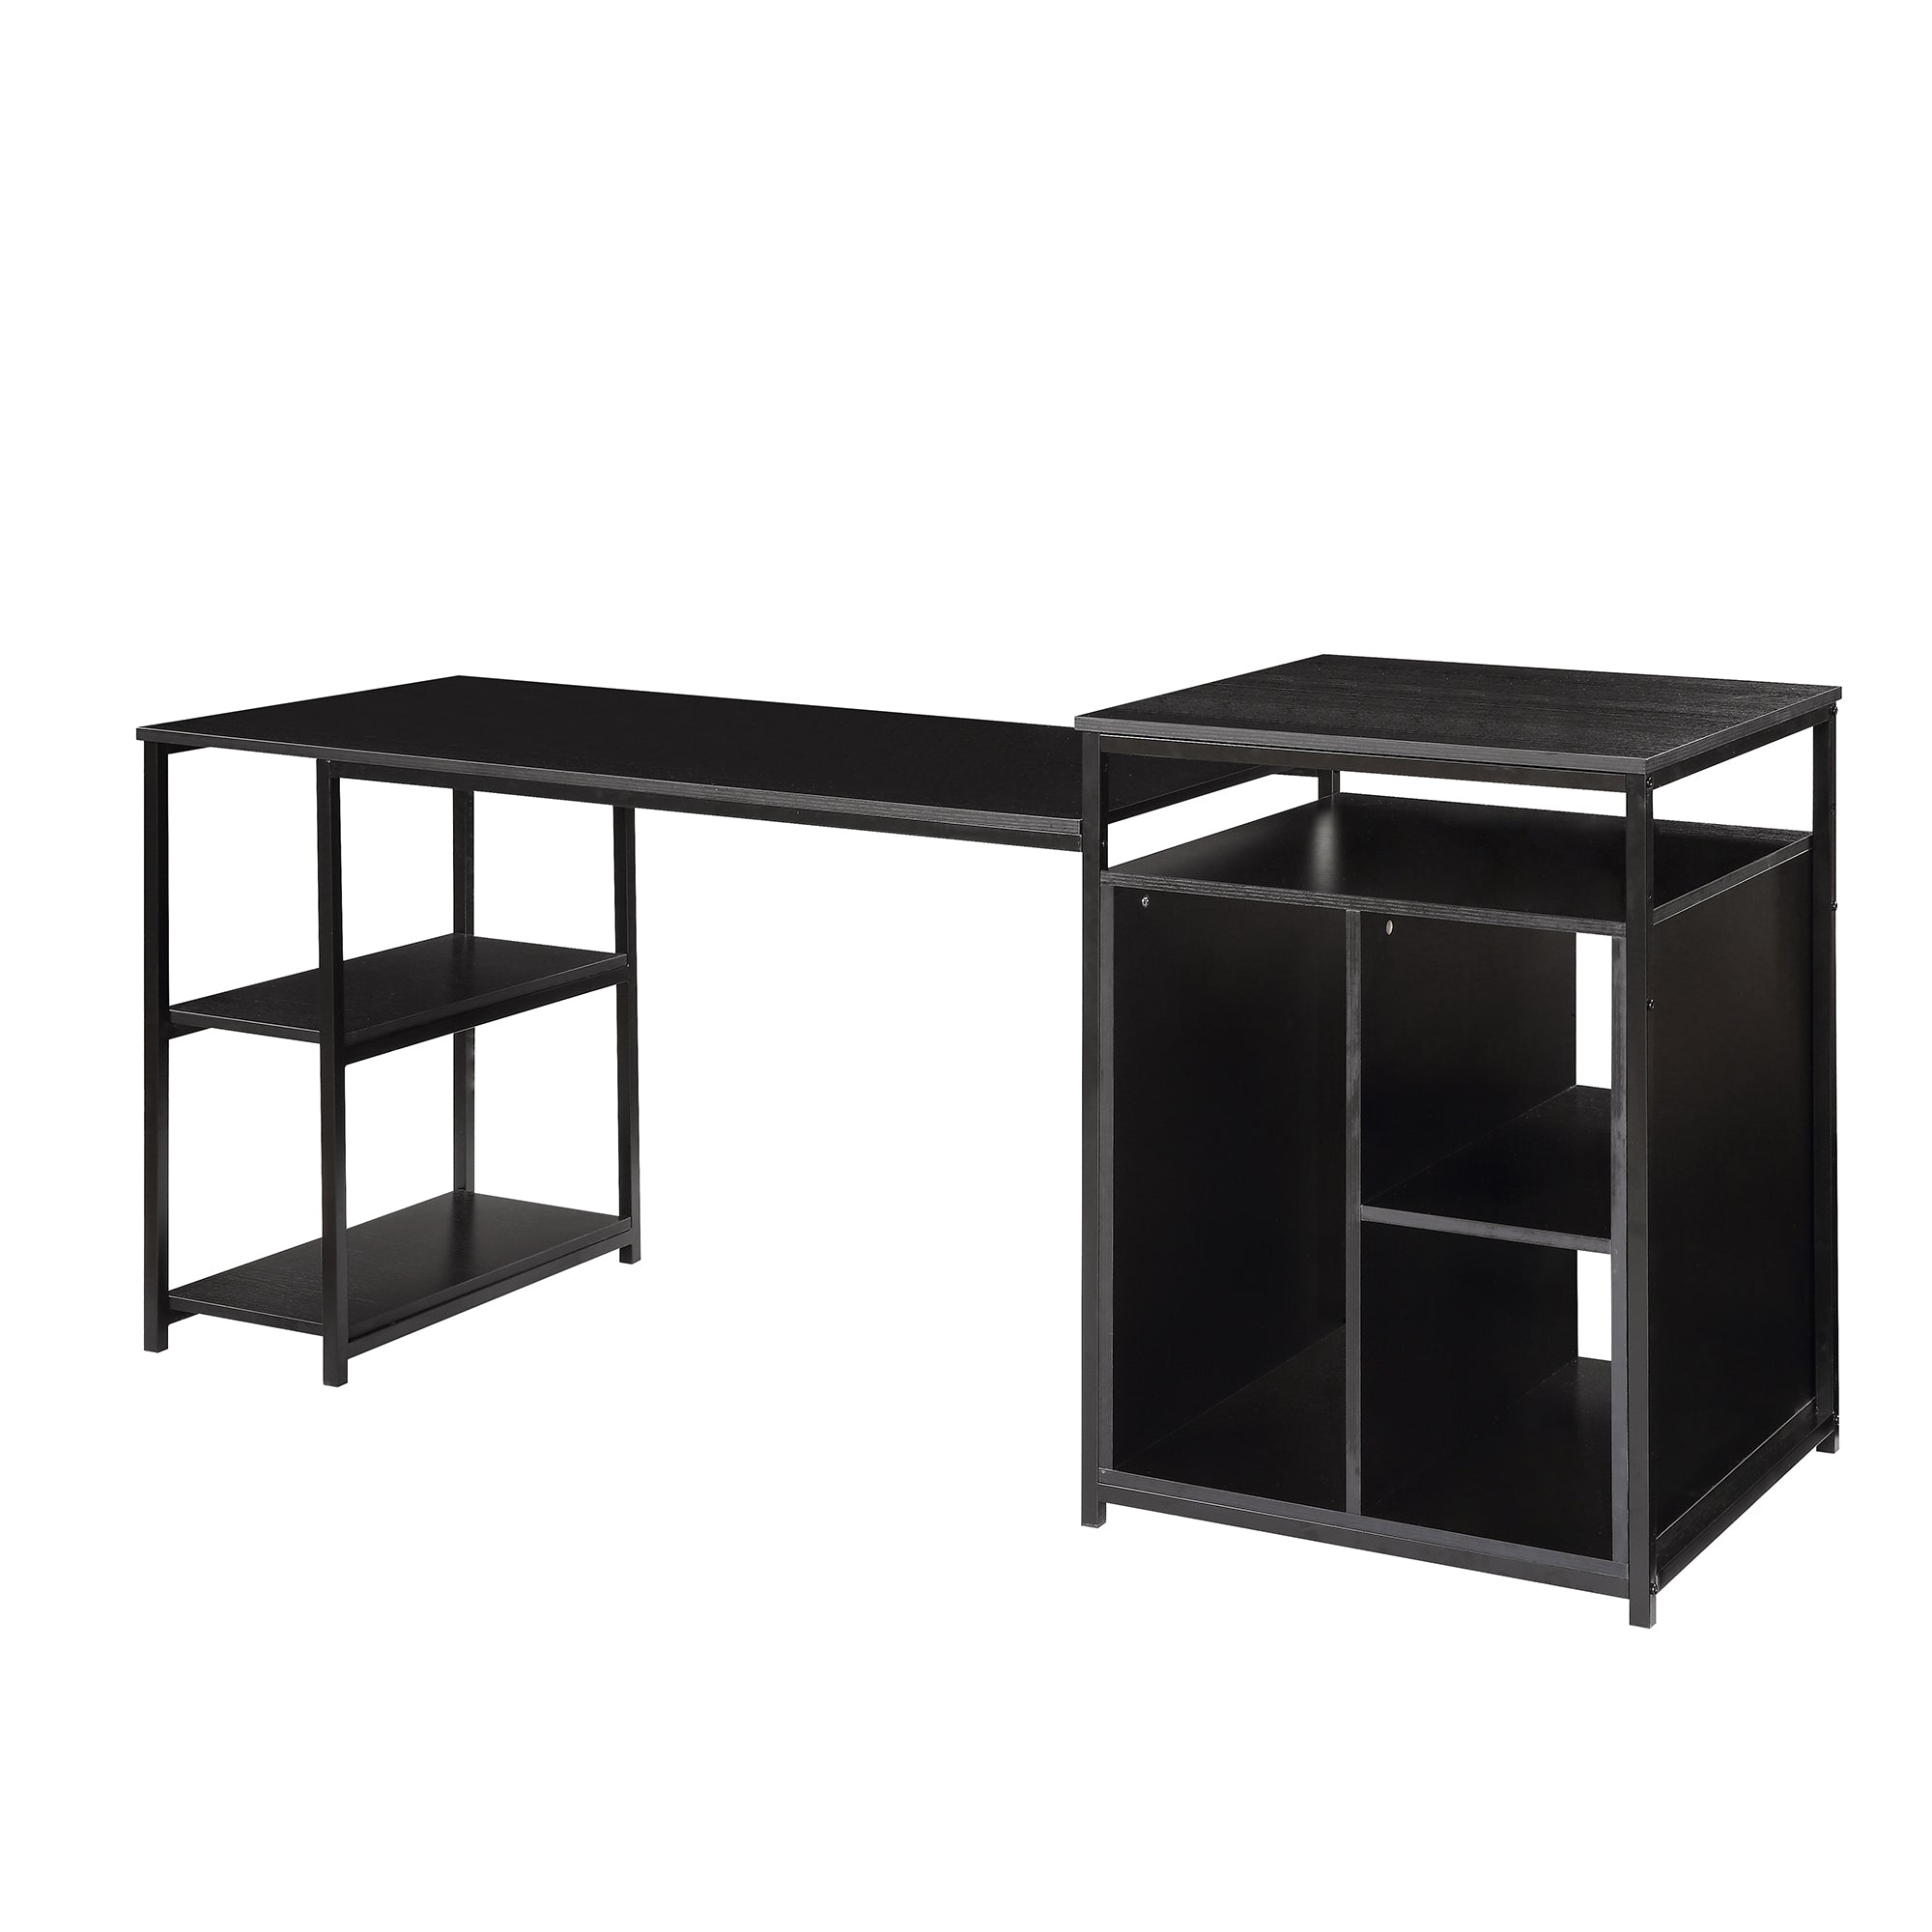 Home Office Computer Desk with Storage Shelf ,CPU storage space and Printer Stand /Writing PC Table with Space Saving Design